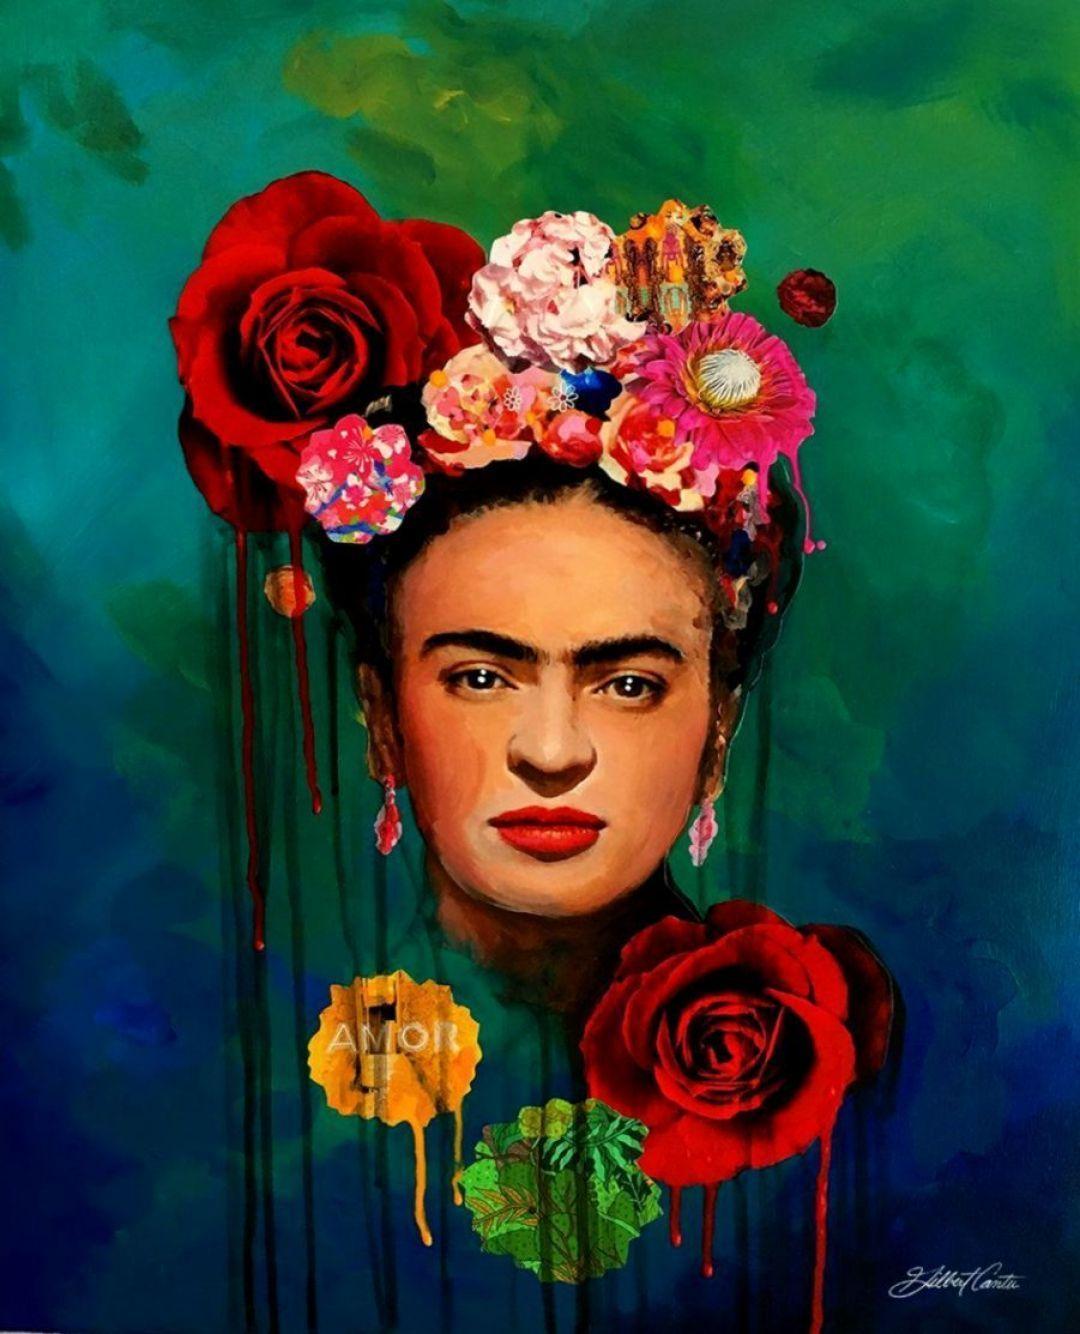 Frida Kahlo is a Mexican painter who is best known for her self-portraits. She was born in Mexico and her father was a photographer. She had a car accident when she was young and had to spend a lot of time in bed. She started painting when she was in bed and it helped her pass the time. She painted a lot about her life and her pain. She was married to Diego Rivera and they had a daughter together. She is known for her bright colors and her use of flowers in her paintings. She is considered one of the most important female artists of the 20th century. - Frida Kahlo